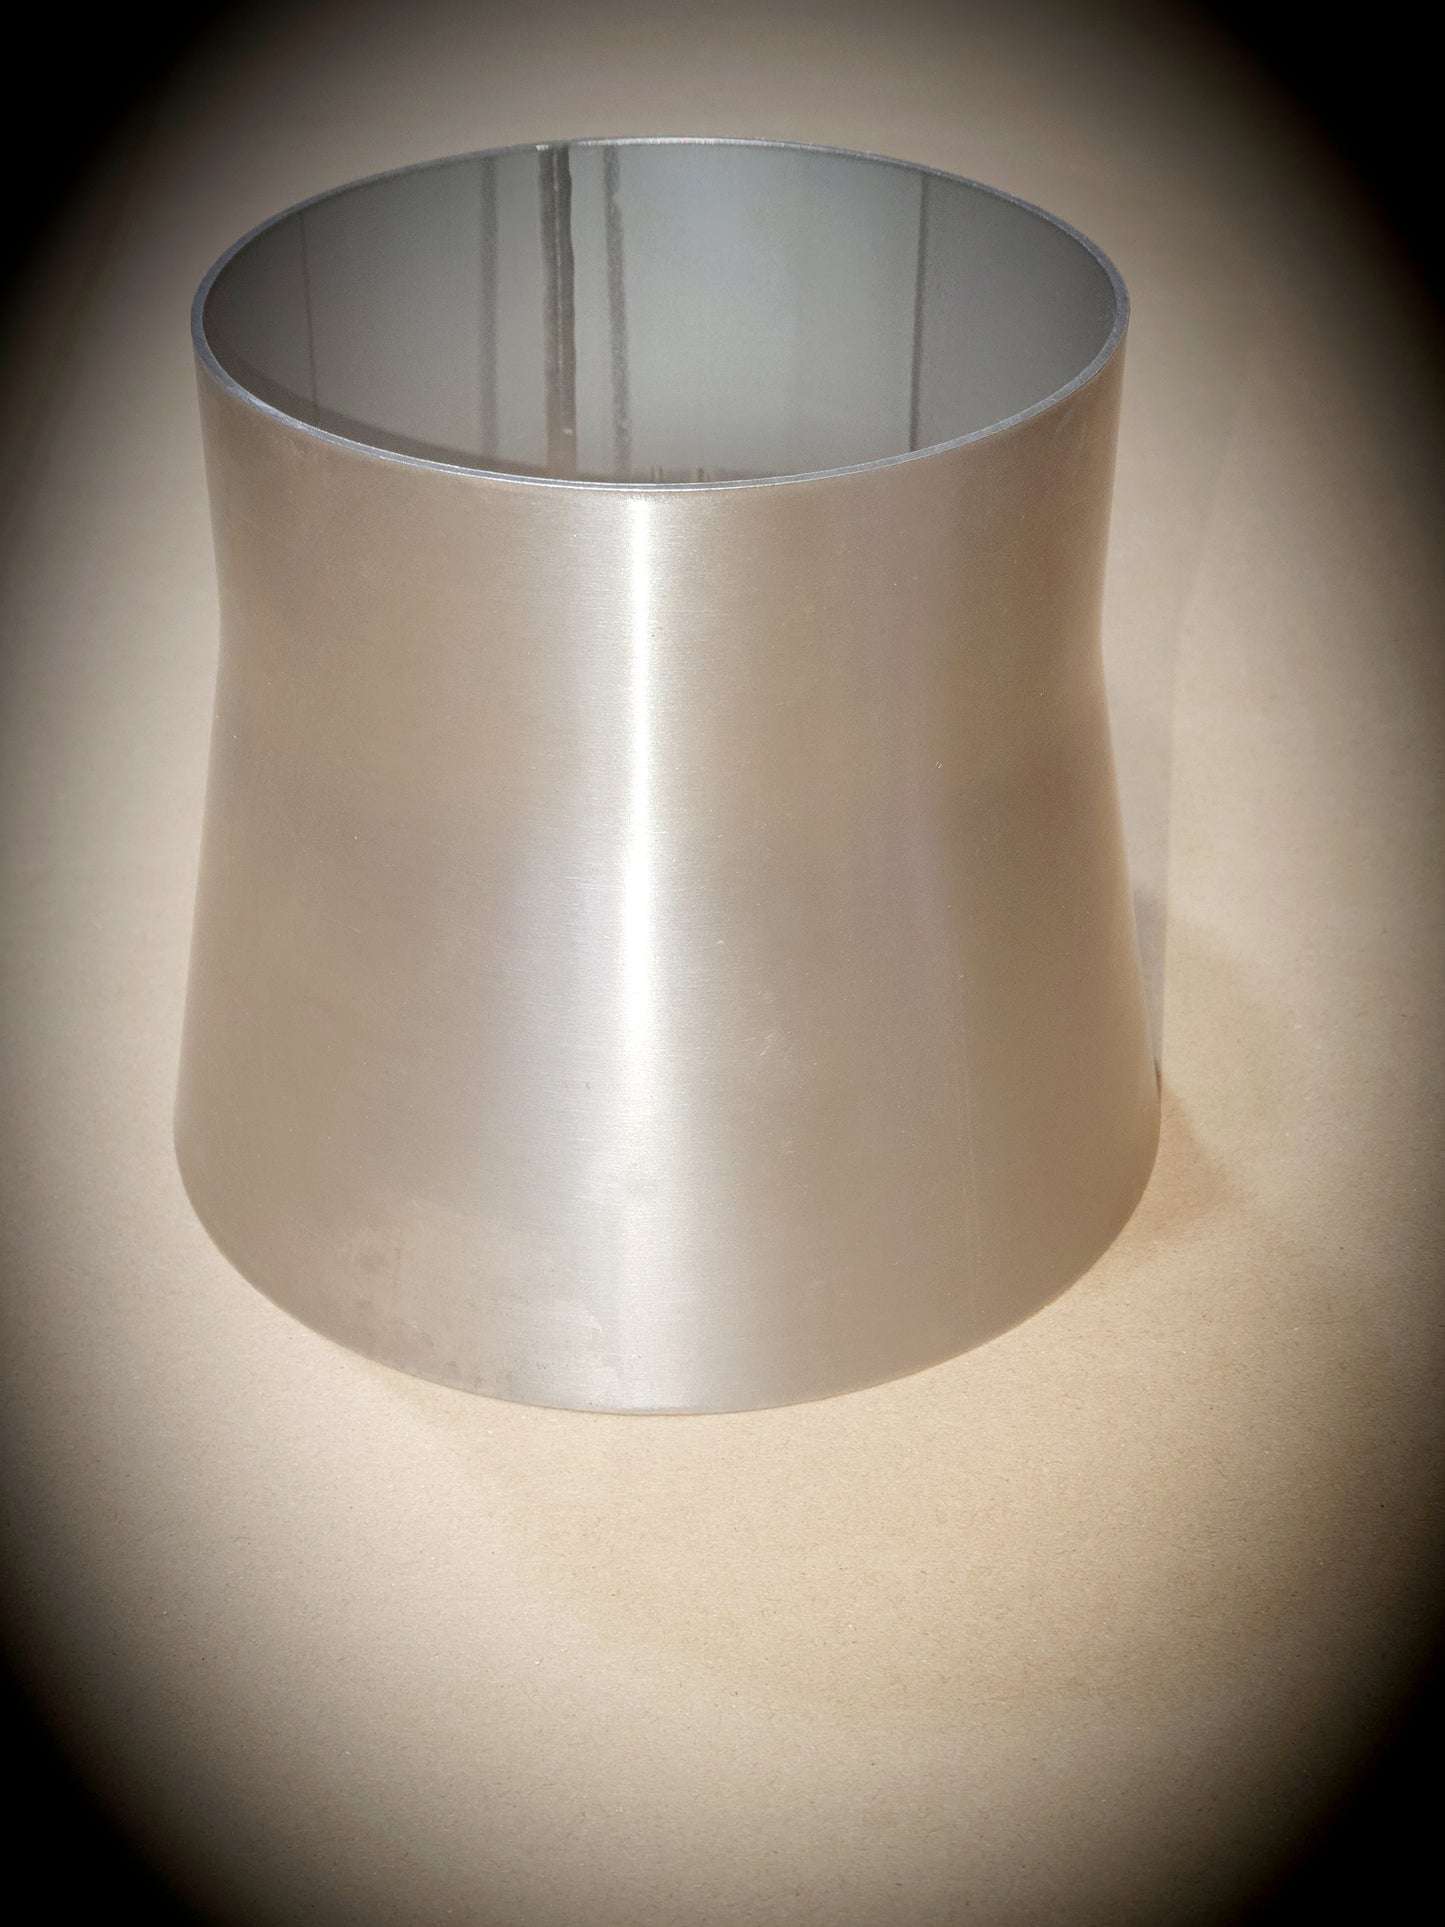 304 S/S TAPERED CONE - 4" (102MM) OD UP TO 5" (127MM) X 3 1/2" (89MM) LONG